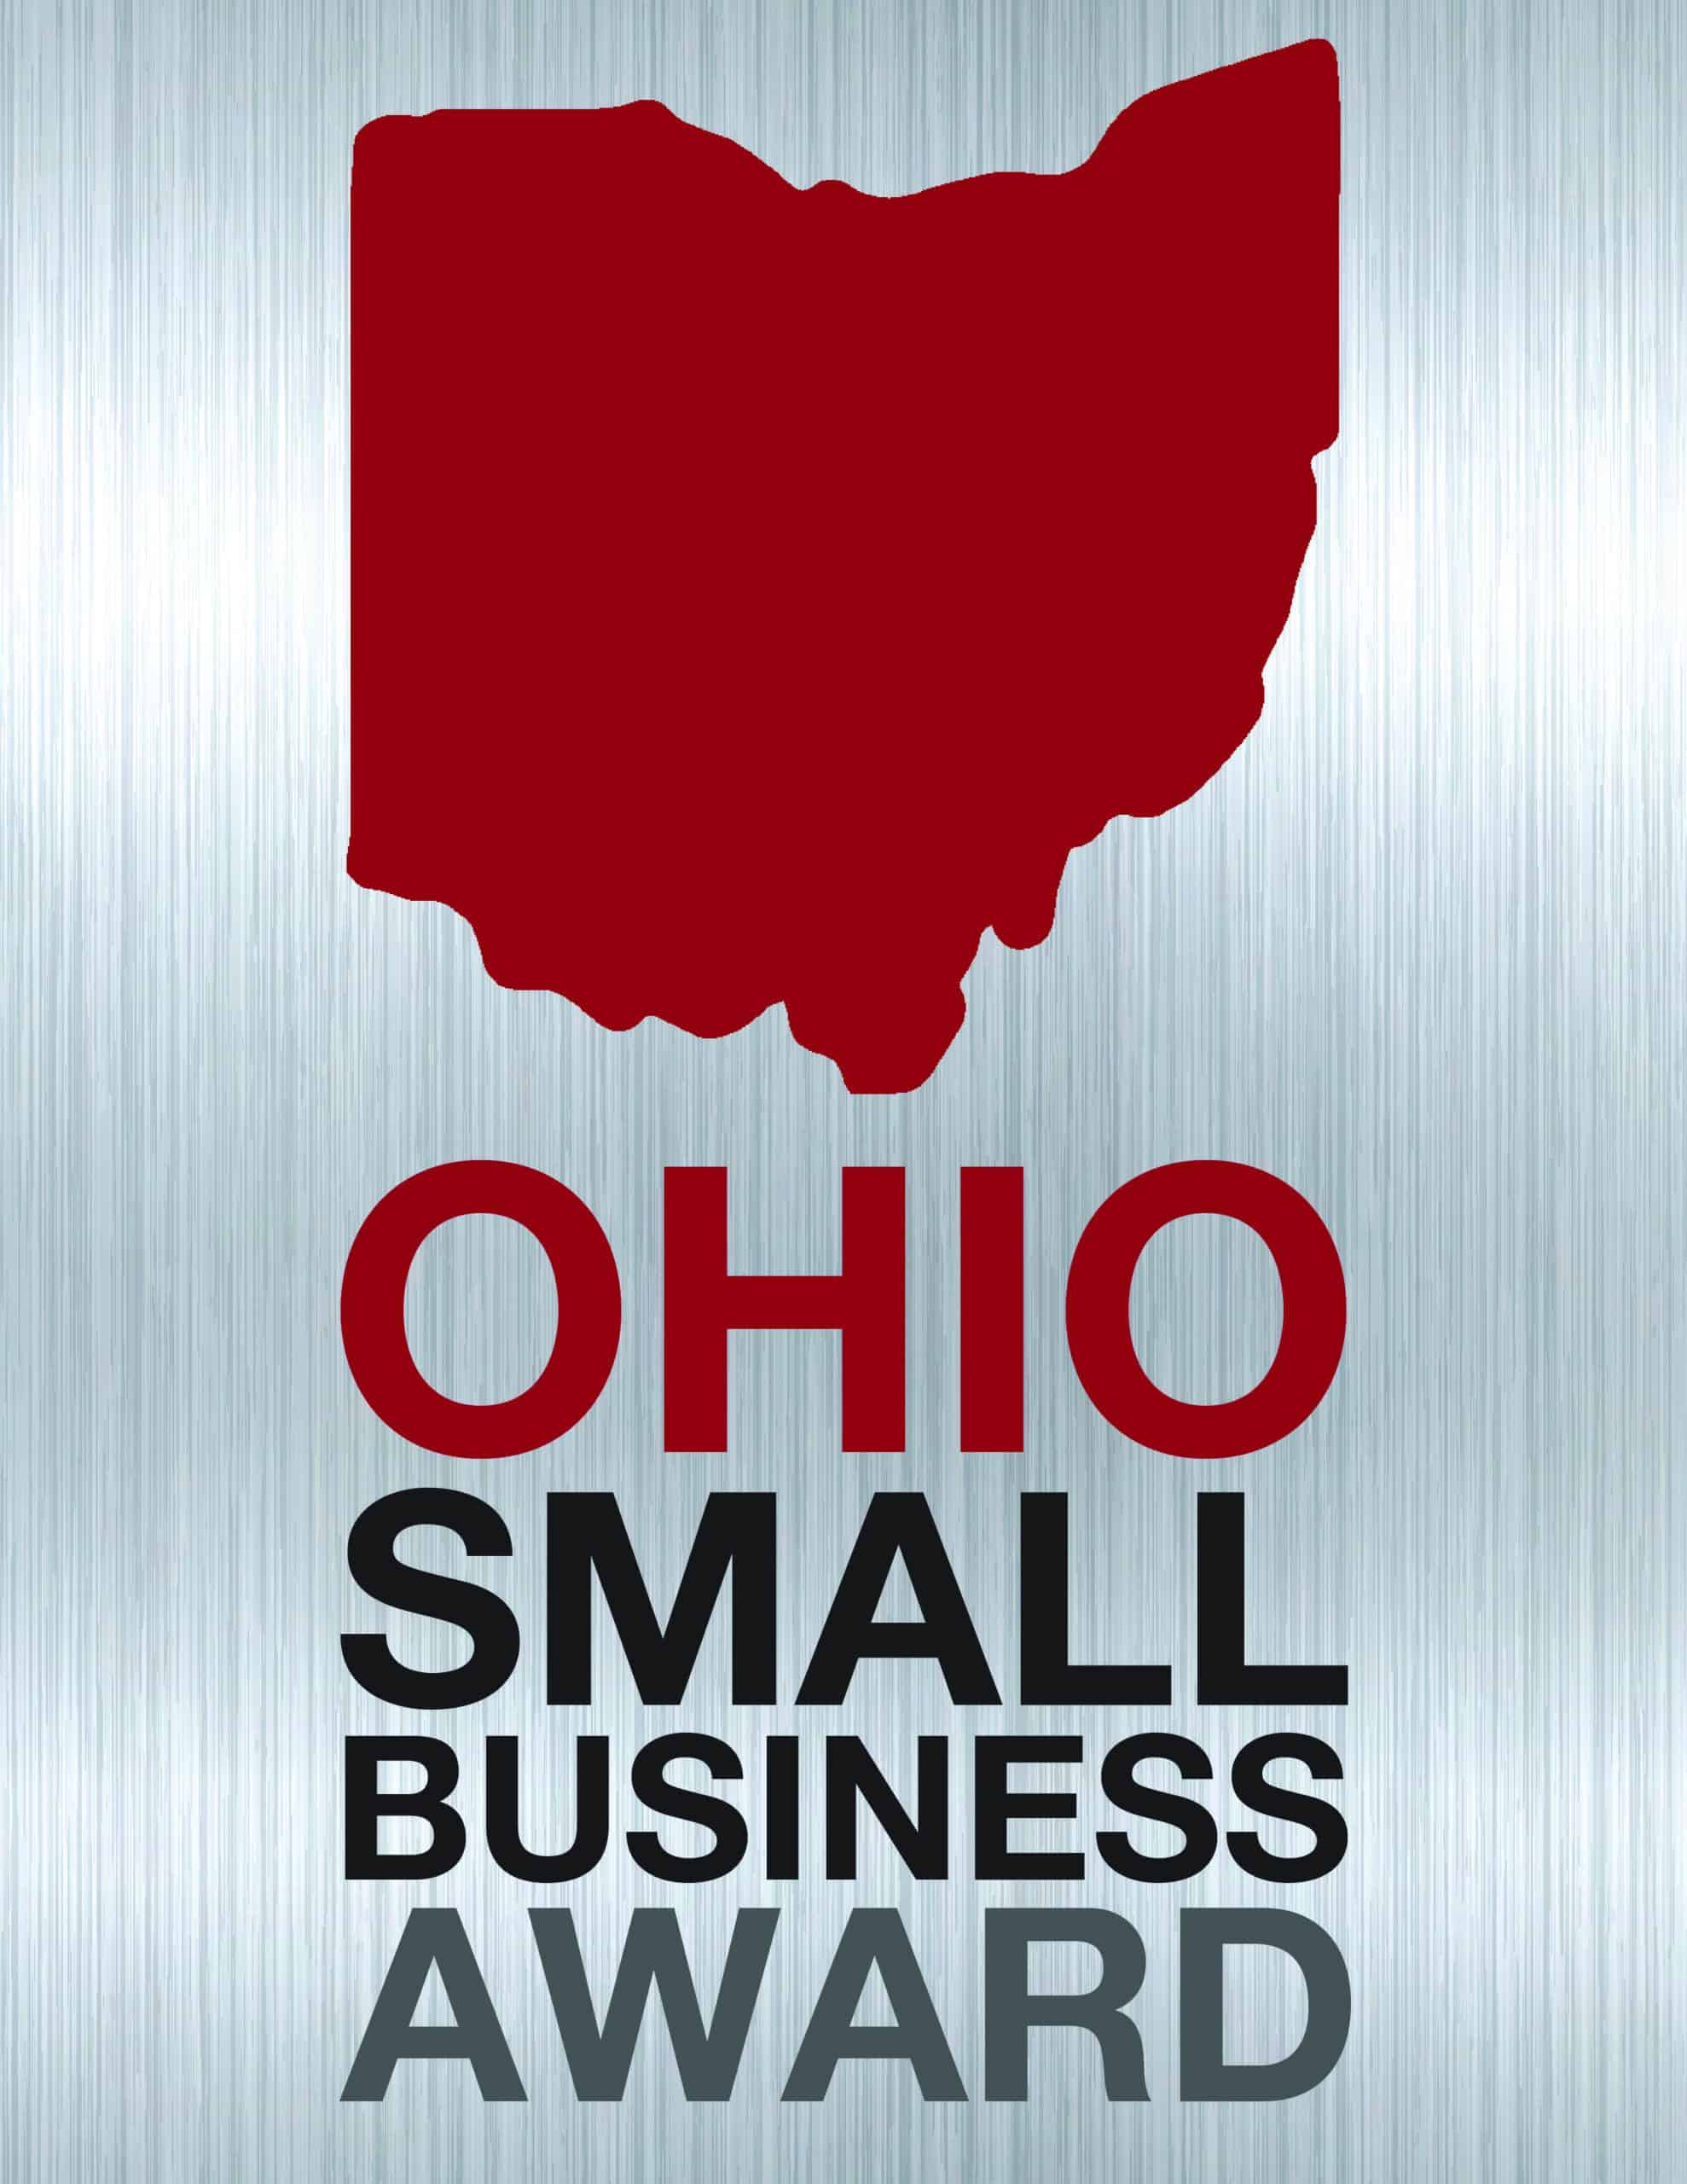 Awarded Best Small Business in Ohio Award by Governor James Rhodes.